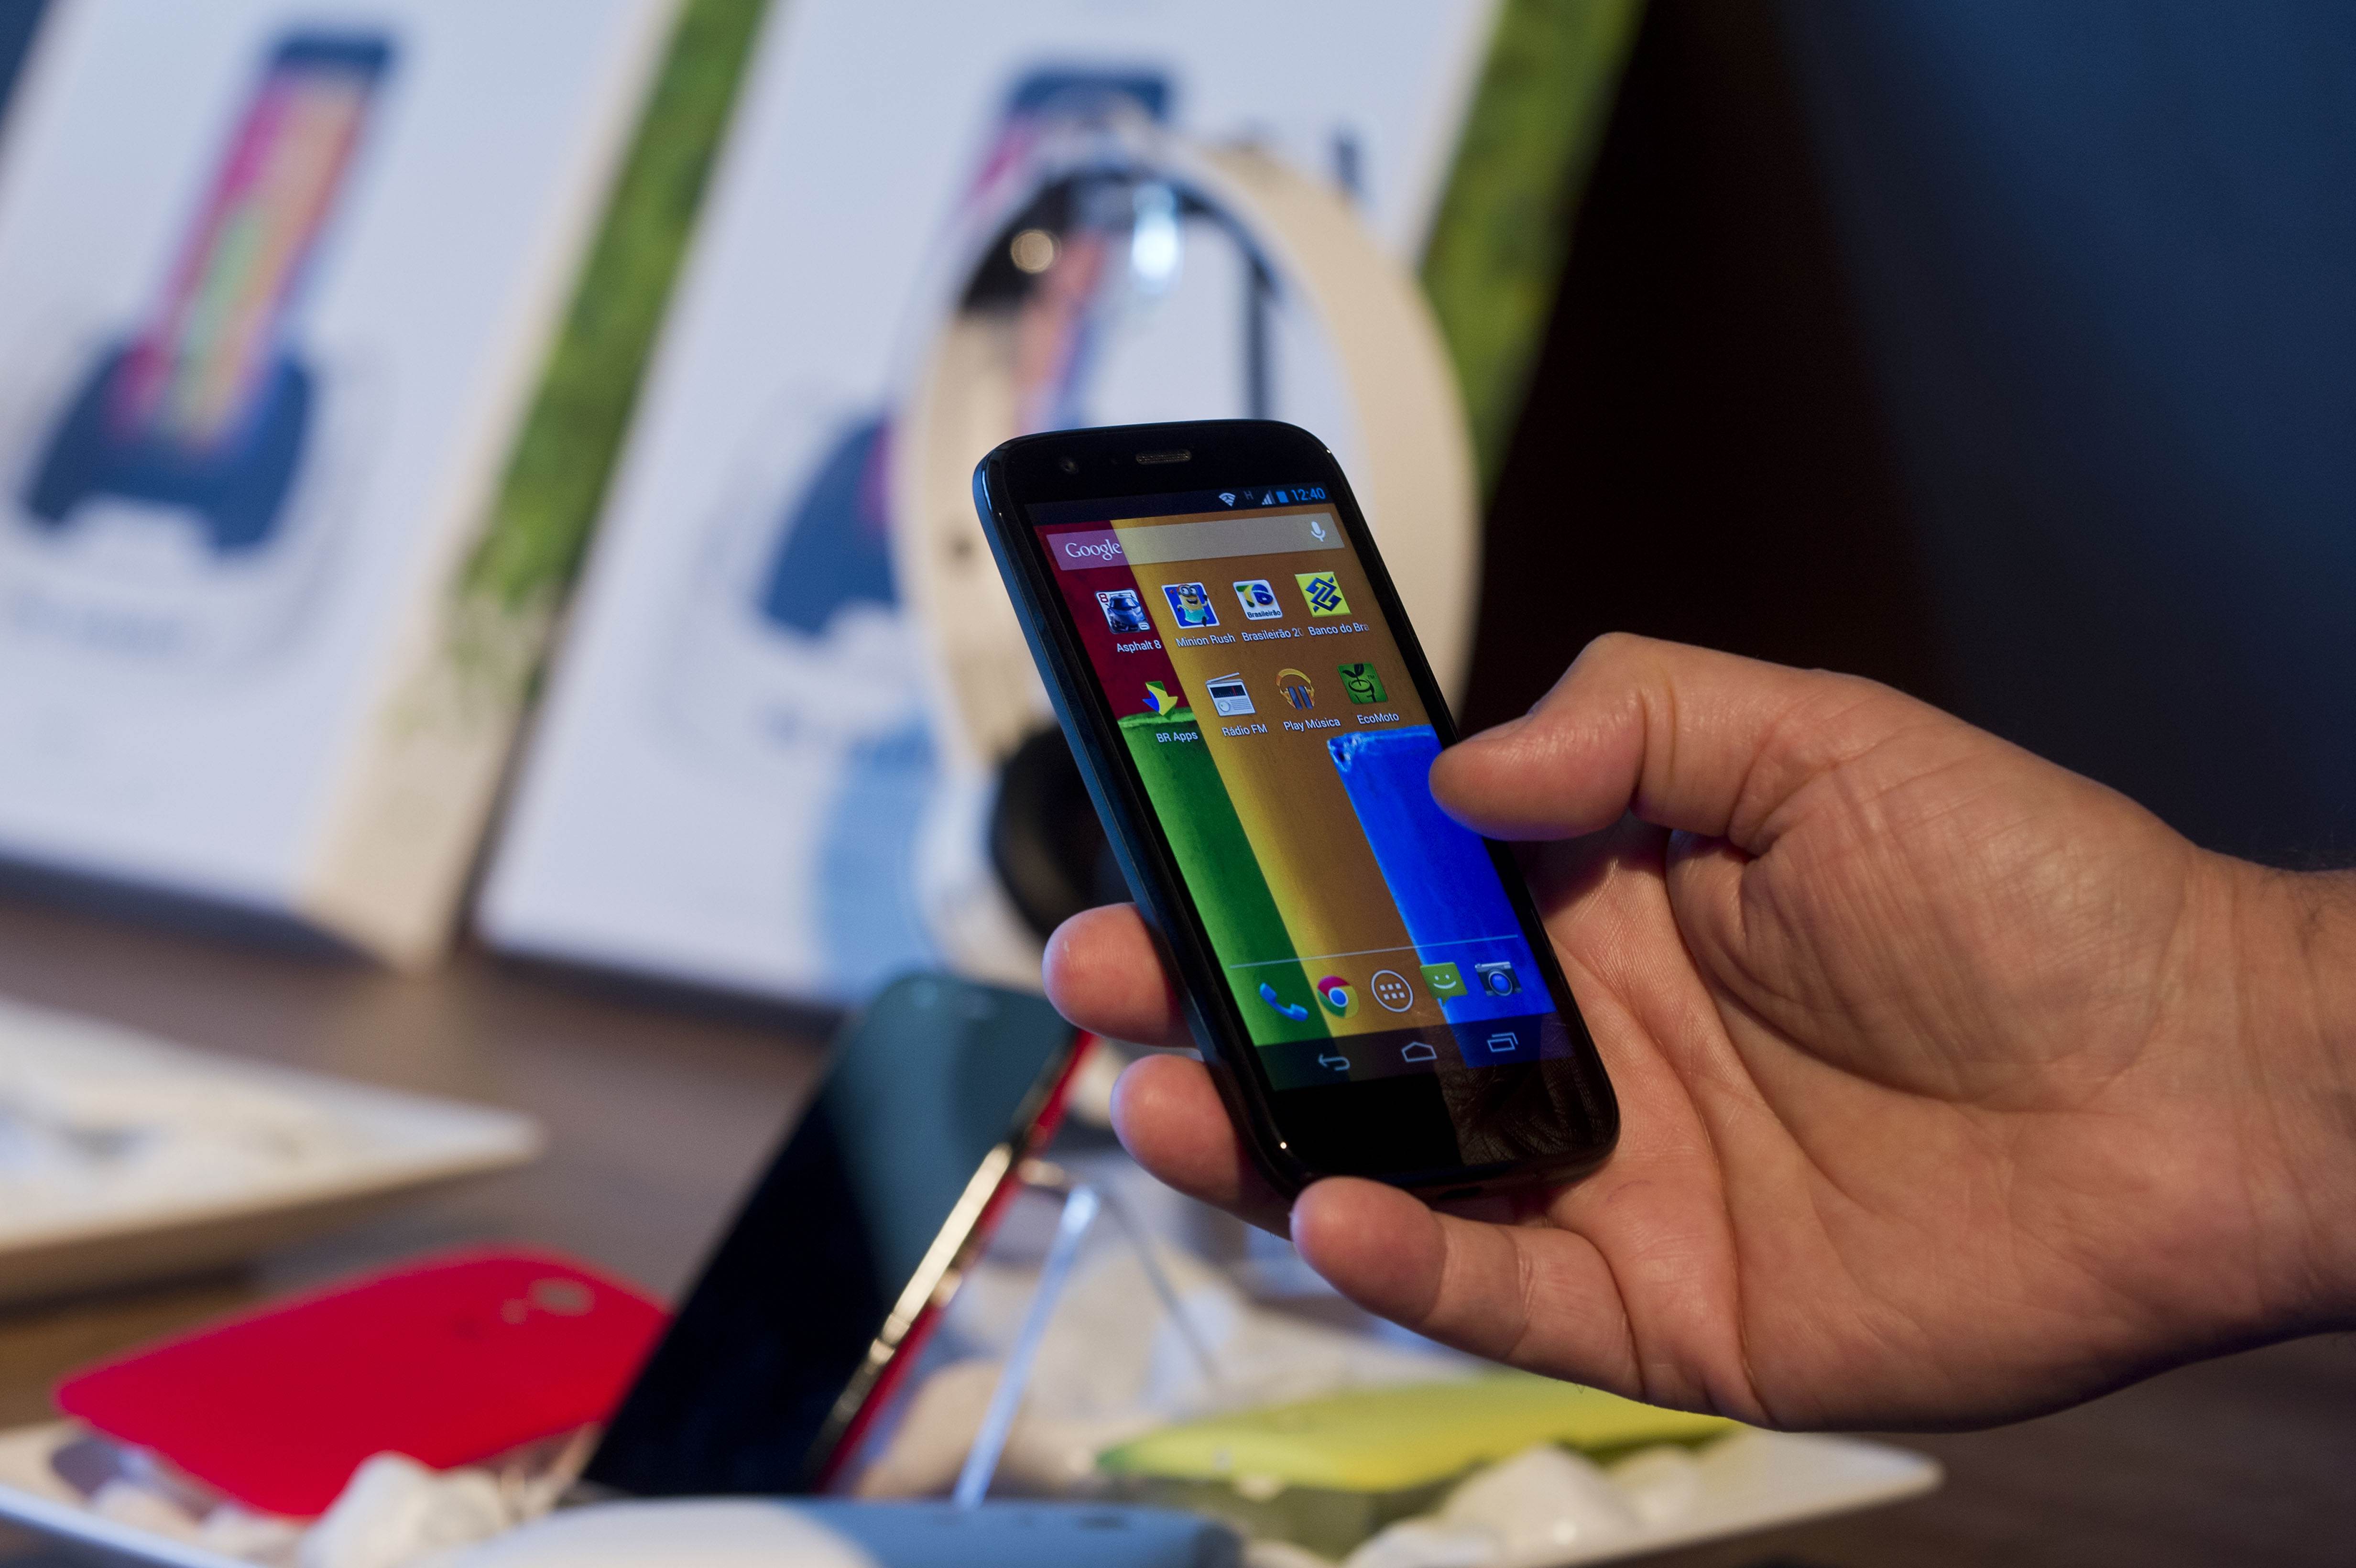 The low-cost Moto G features a 4.5-inch screen, a quad-core processor and cameras front and rear. Photo: AFP